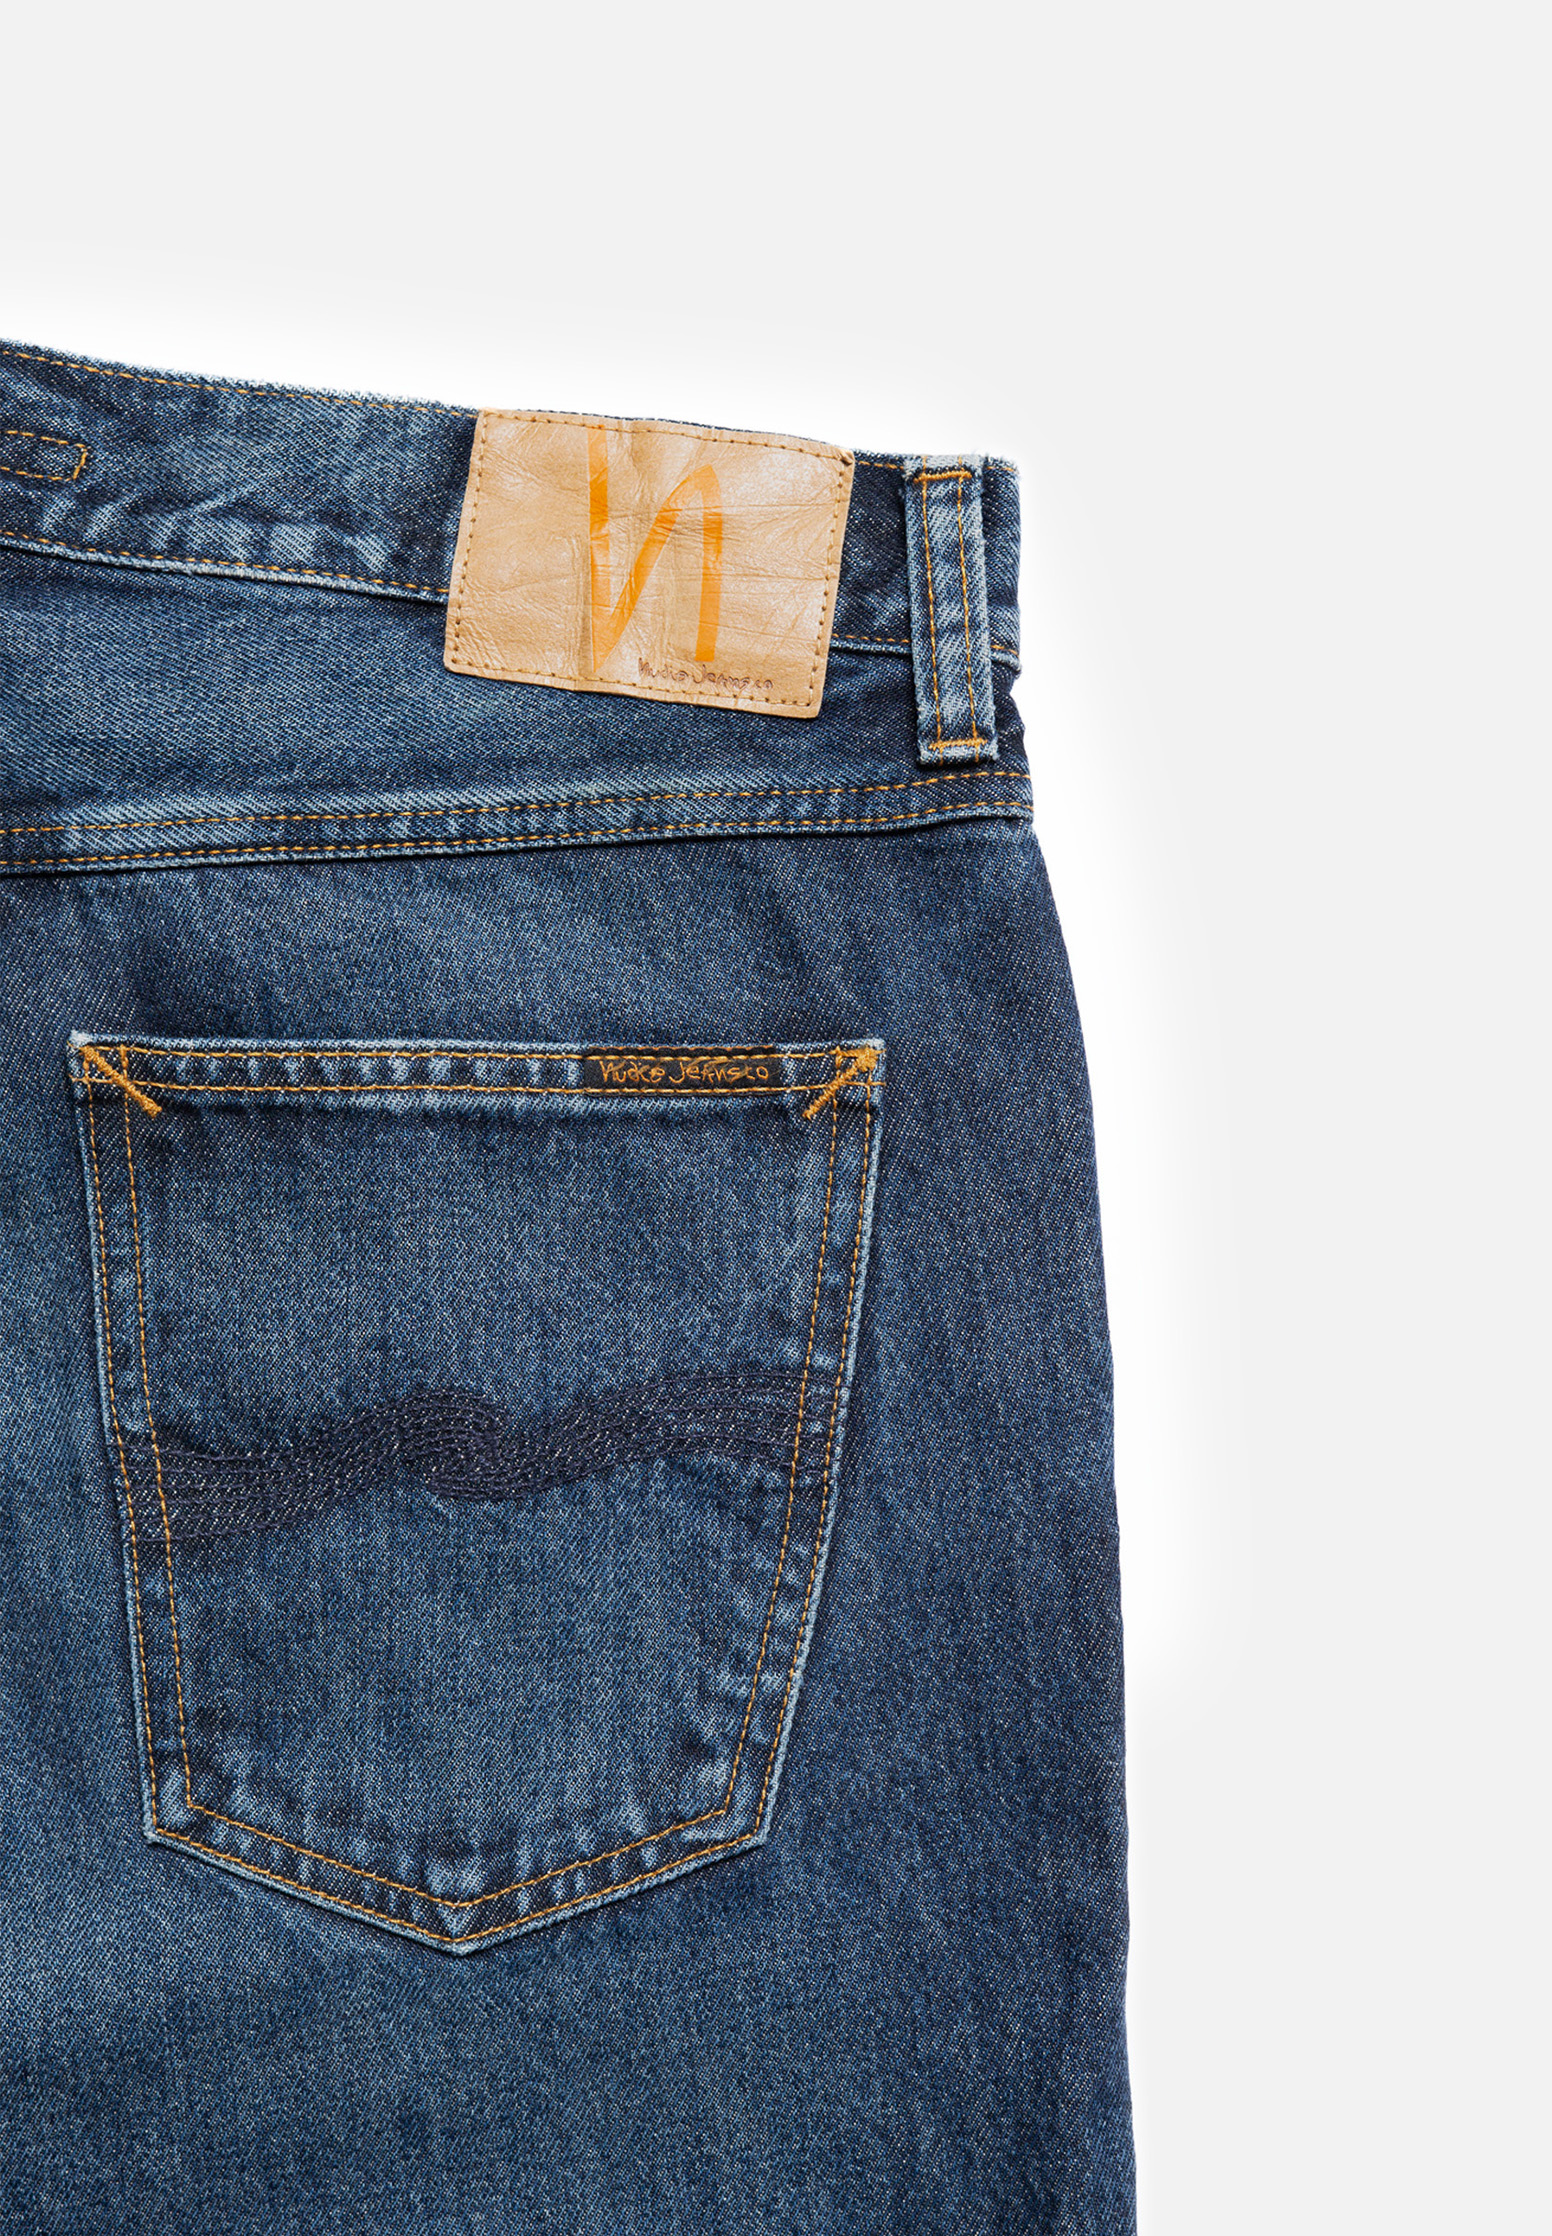 NUDIE JEANS Jeans Gritty Jackson blue soil 31/30